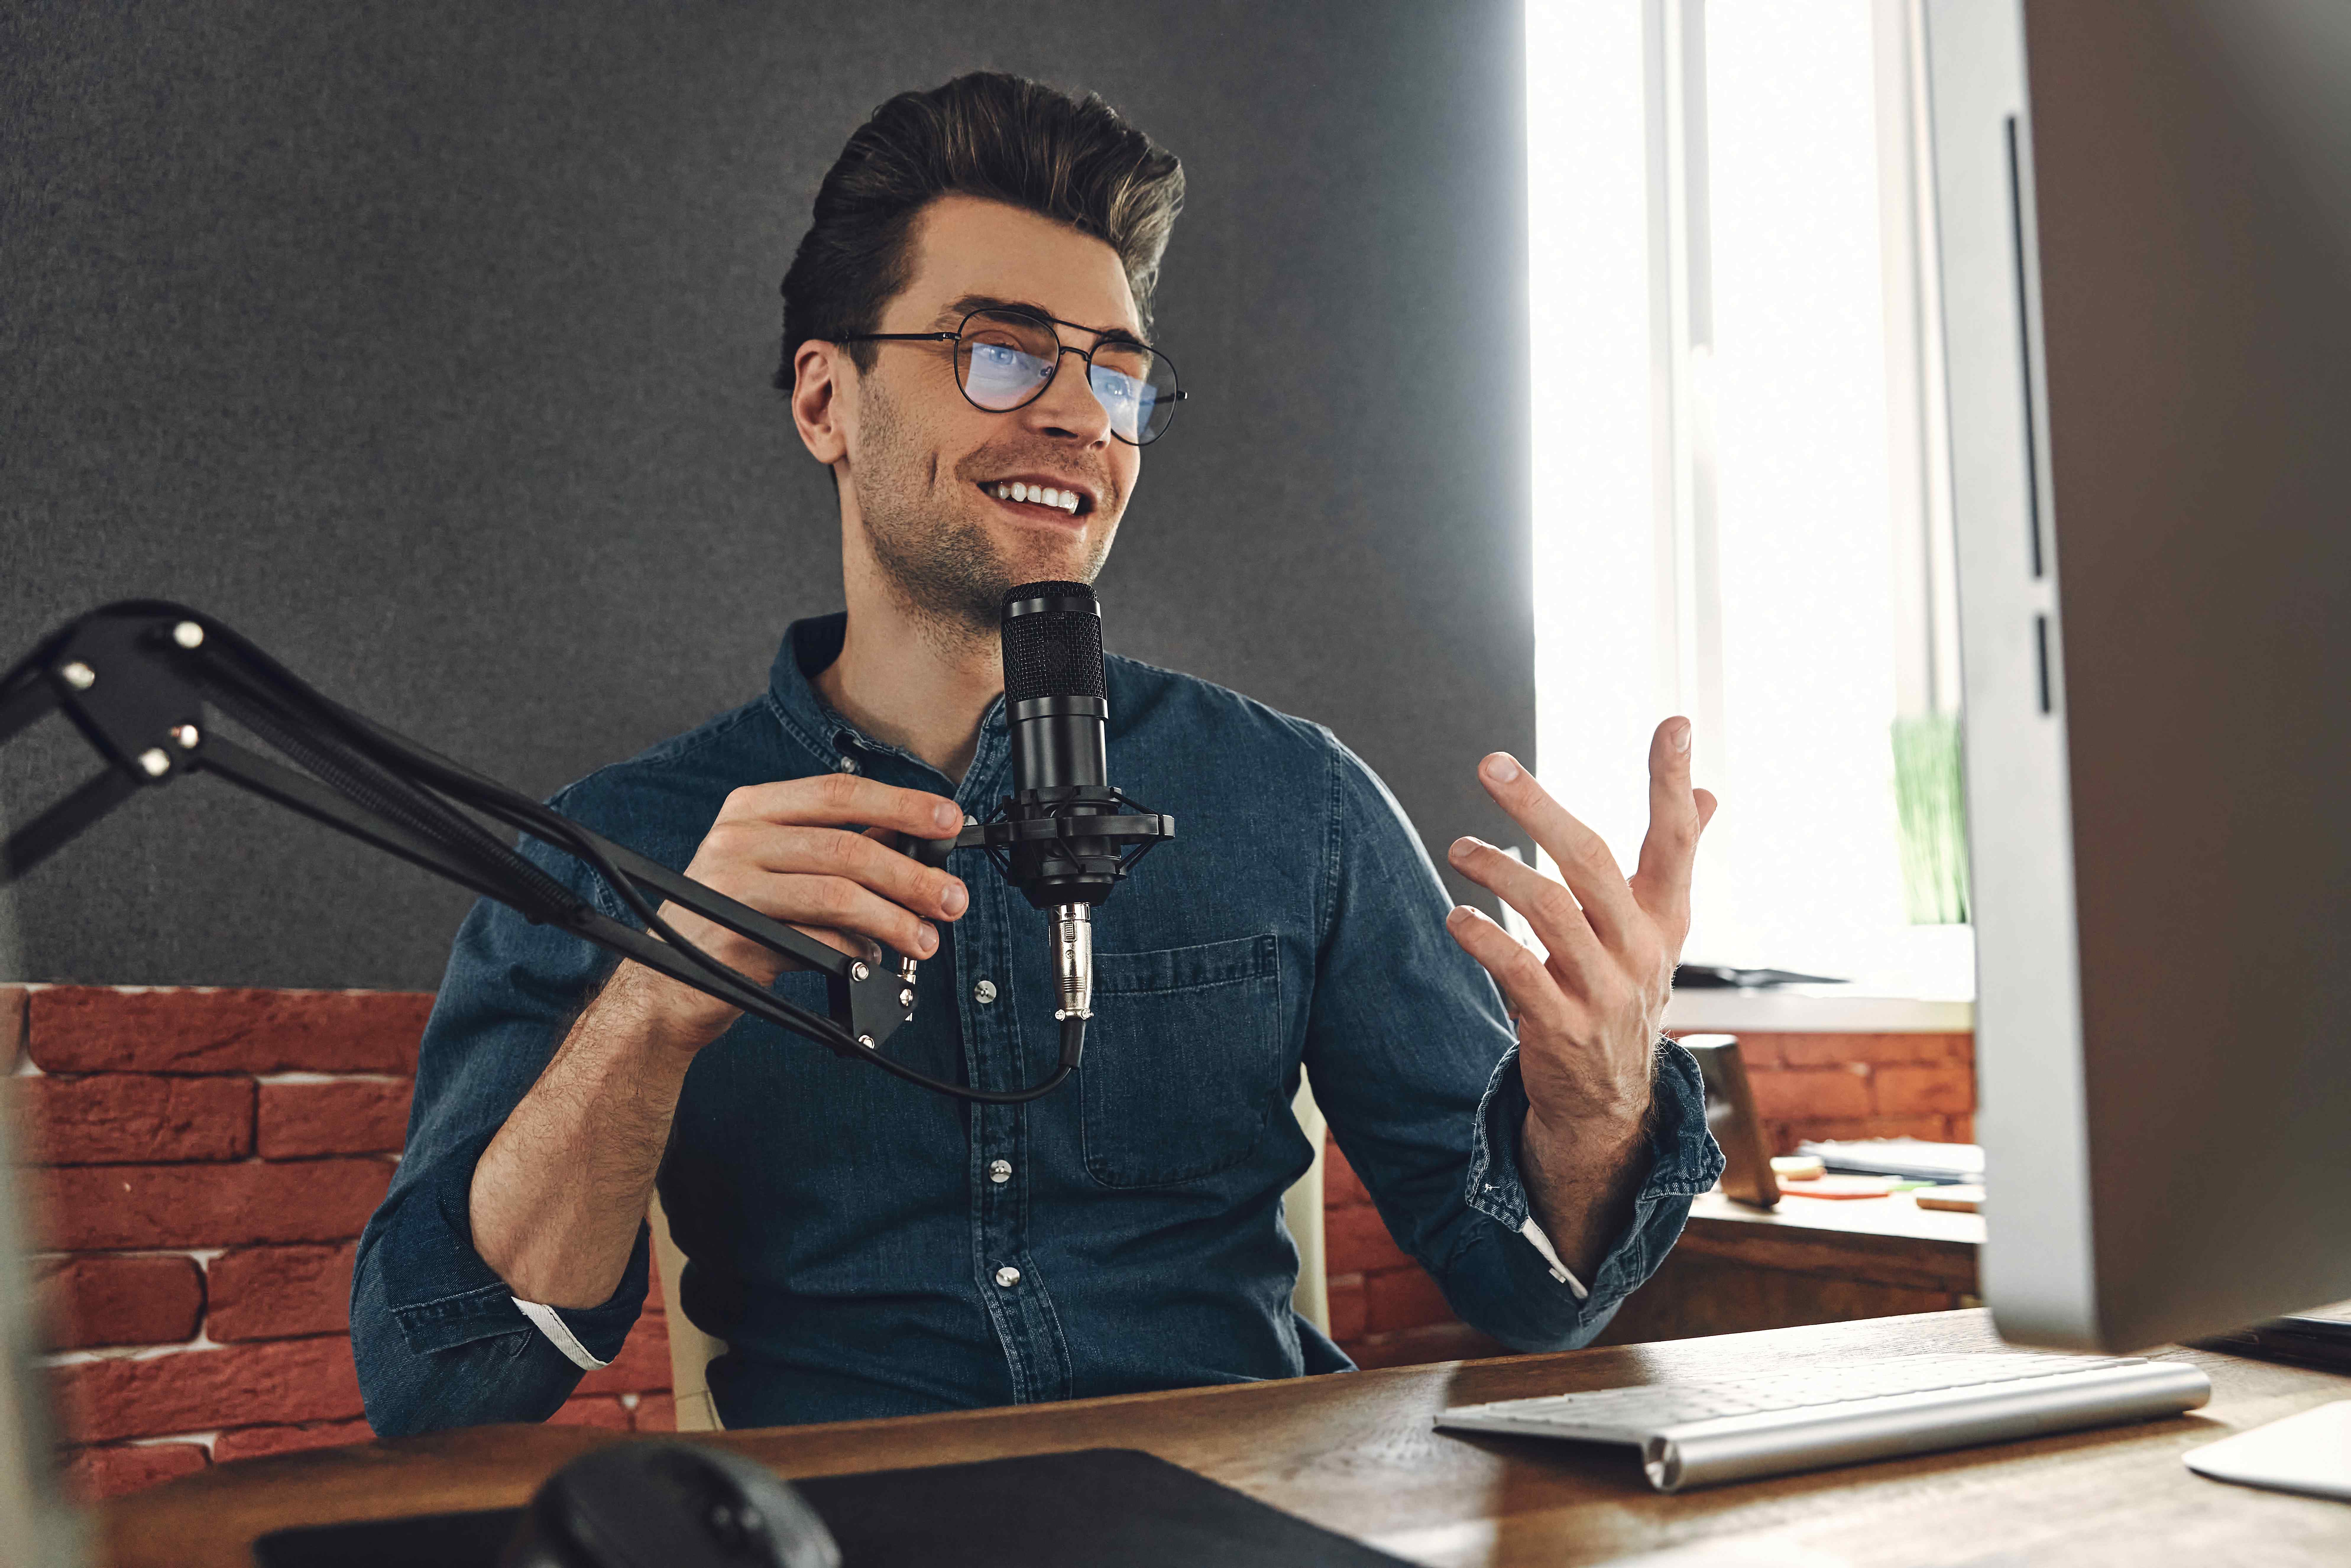 How Podcast Marketing Can Drive Your Business Forward Effectively